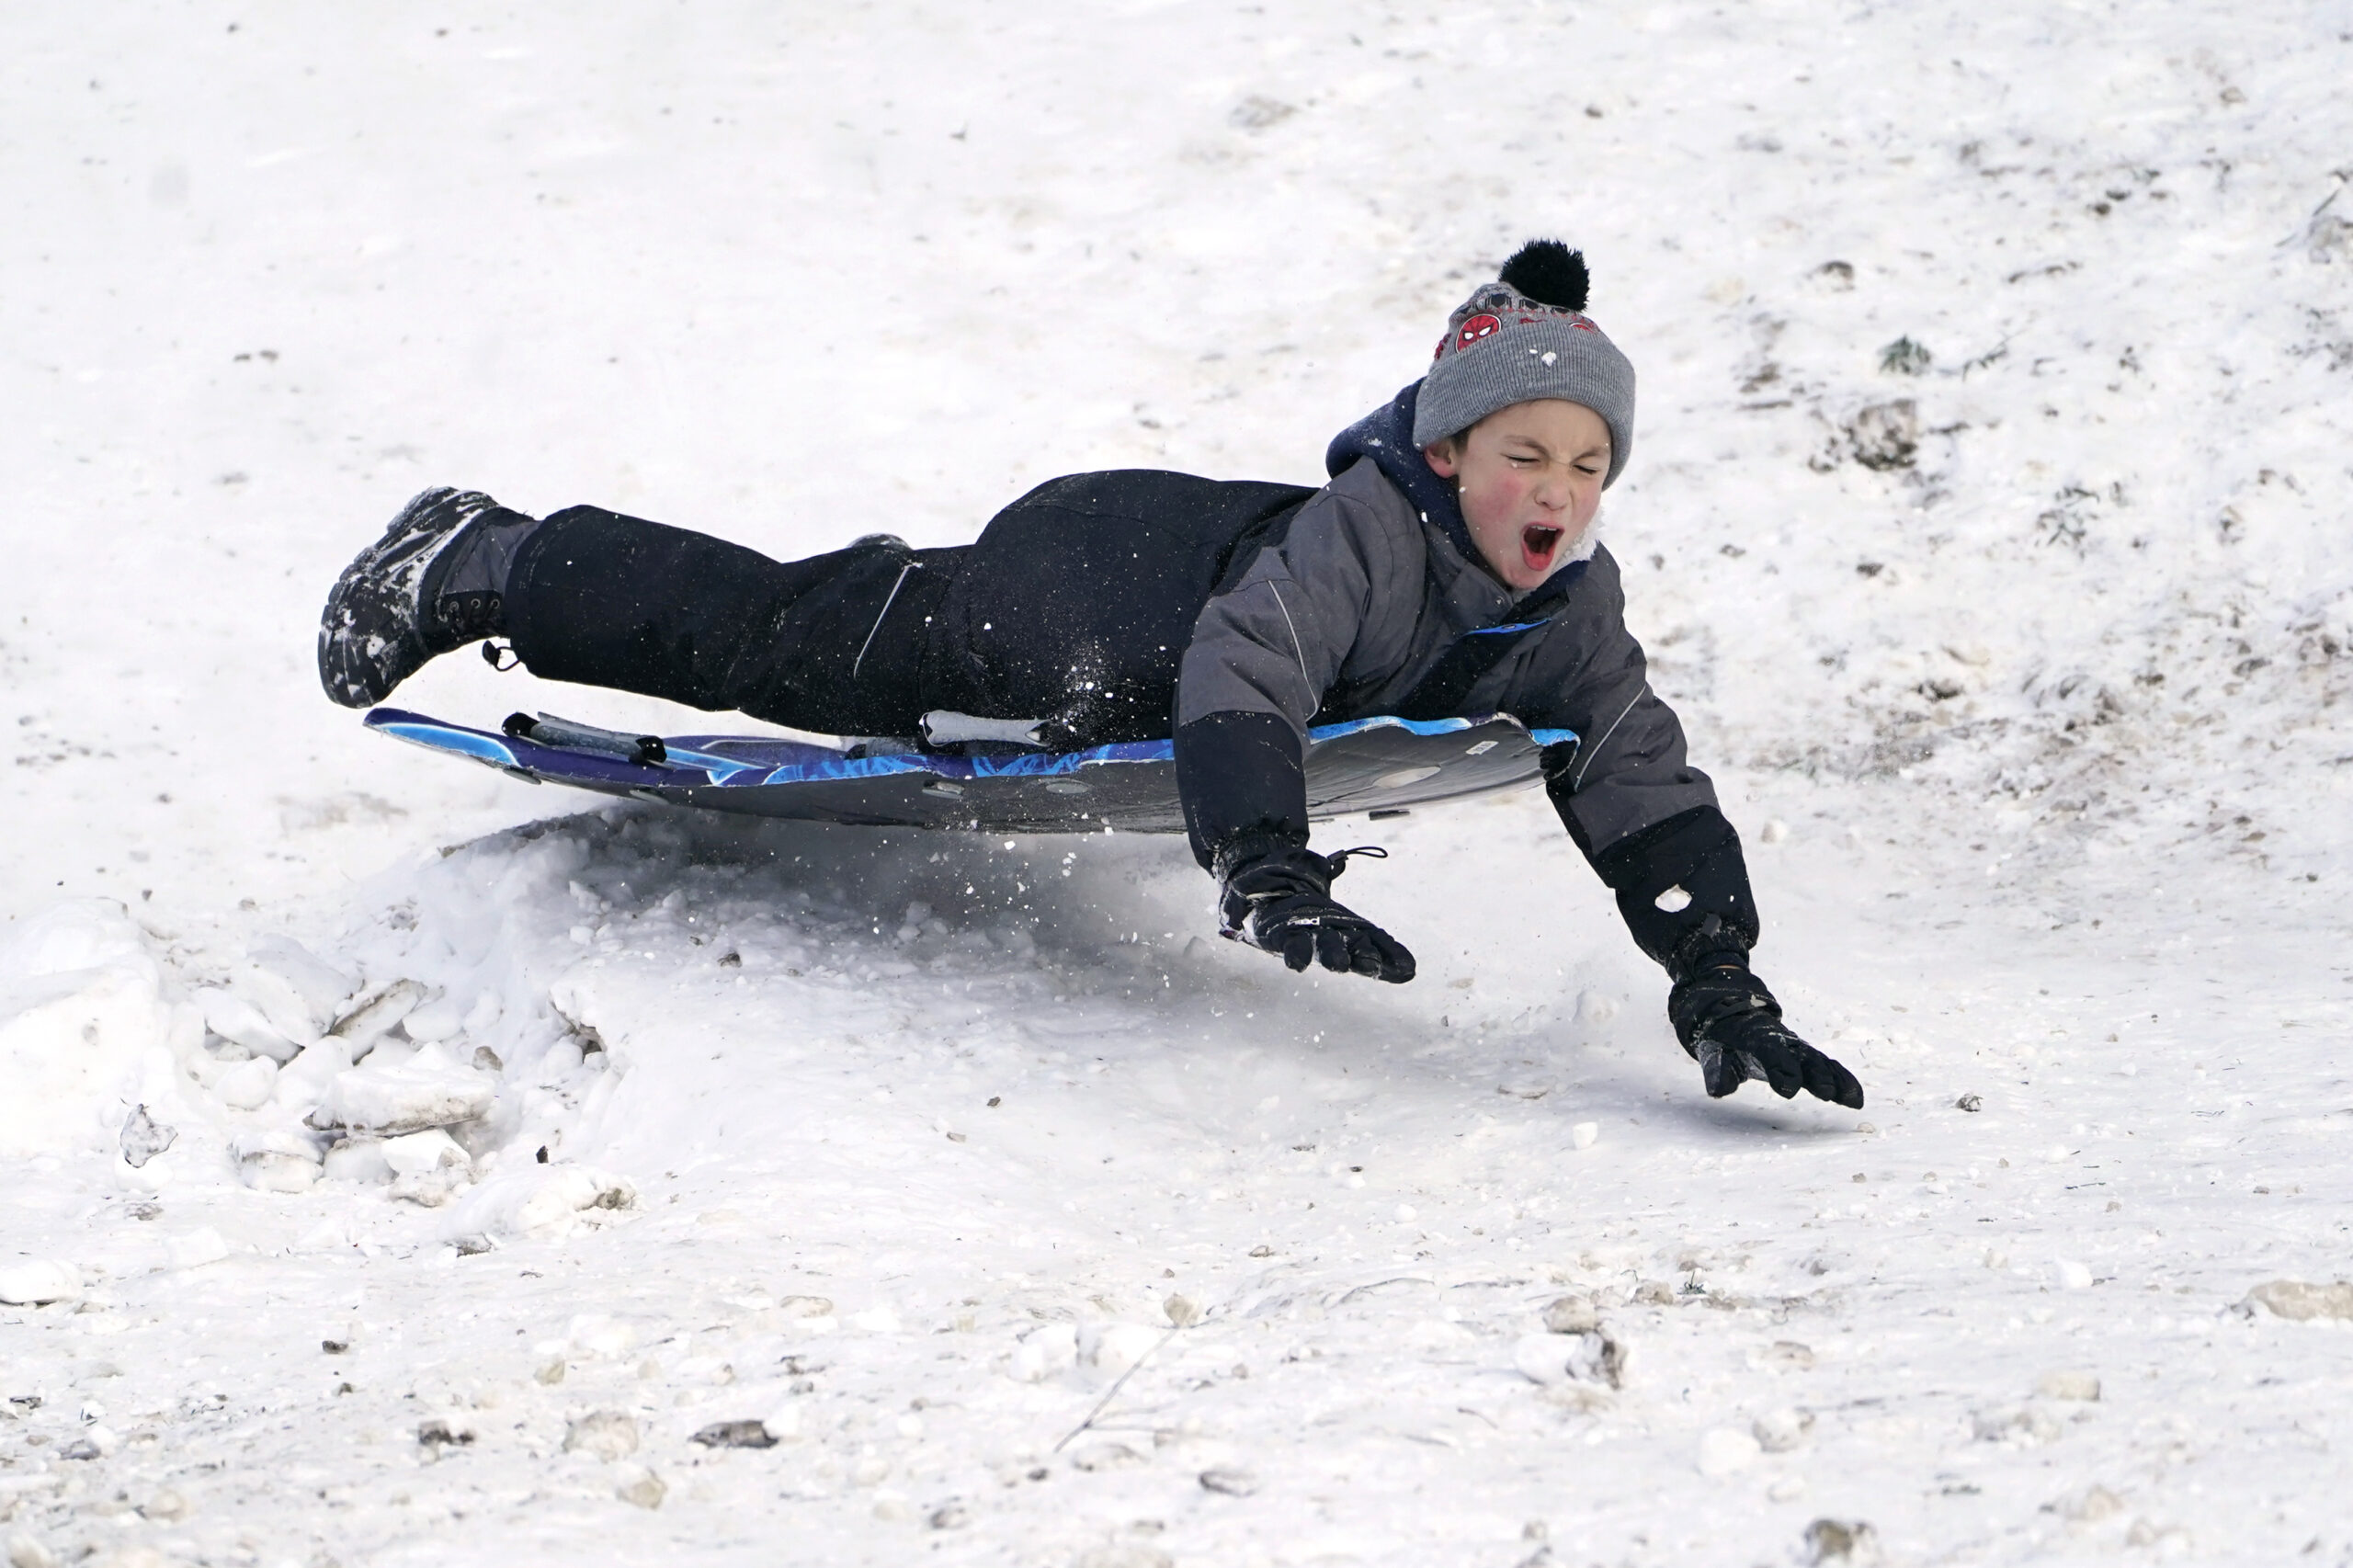 Titus Gonzalez goes airborne after hitting a bump while sledding where nearly a foot of snow fell over the weekend, Monday, Dec. 27, 2021, in a city park in Bellingham, Wash. Sunday's snow showers blew into the Pacific Northwest from the Gulf of Alaska, dumping up to 6 inches across the Seattle area. More than a foot was reported near Port Angeles across the Puget Sound on the Olympic Peninsula. (AP Photo/Elaine Thompson)